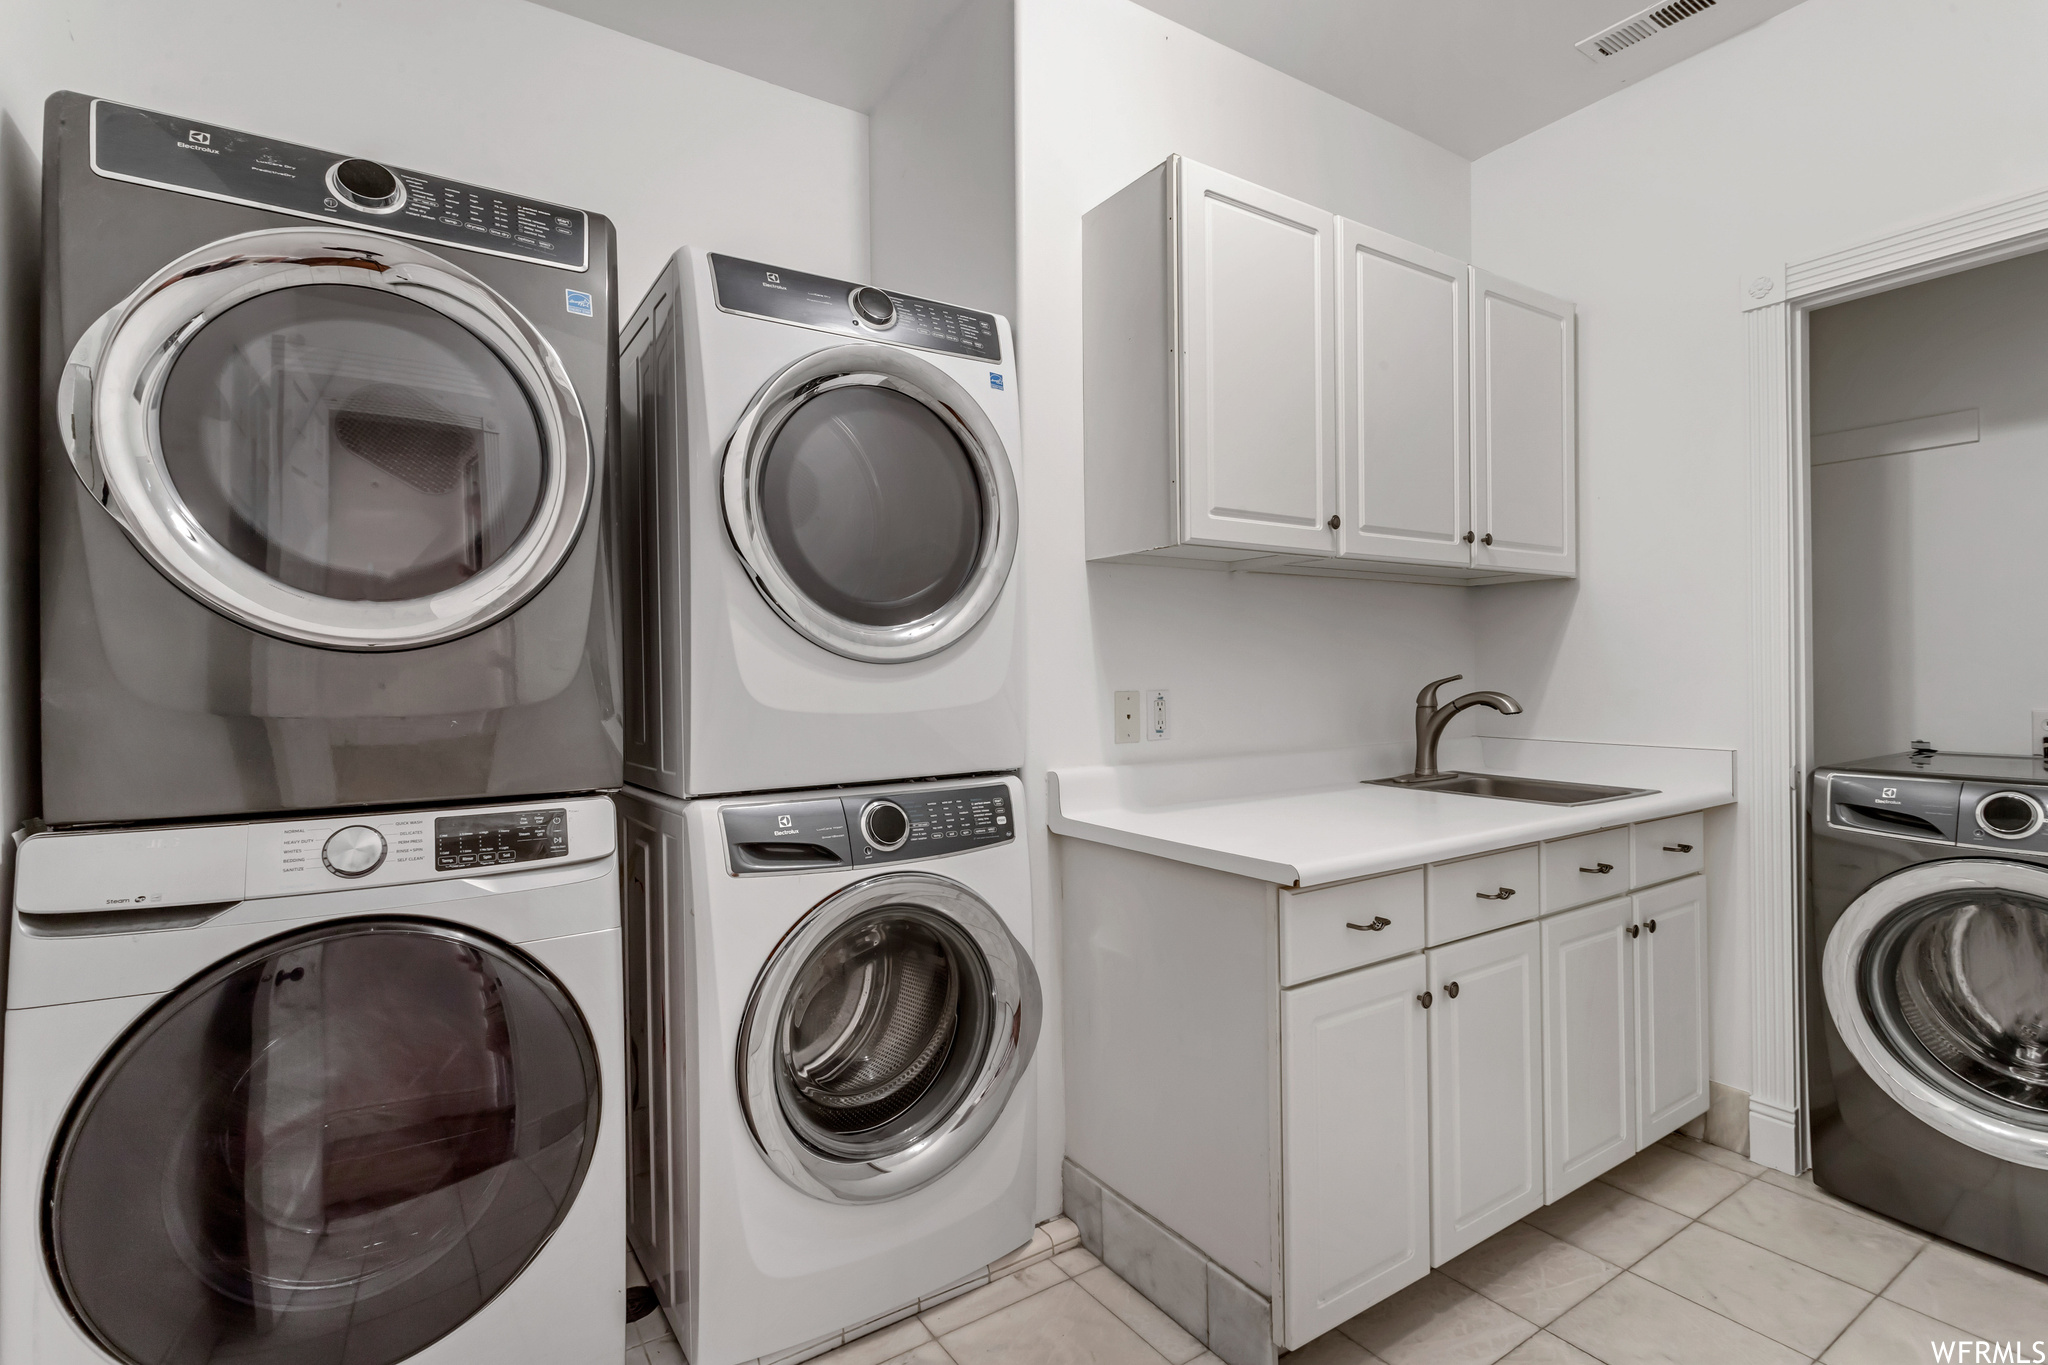 Laundry room with light tile floors, stacked washer and clothes dryer, and separate washer and dryer